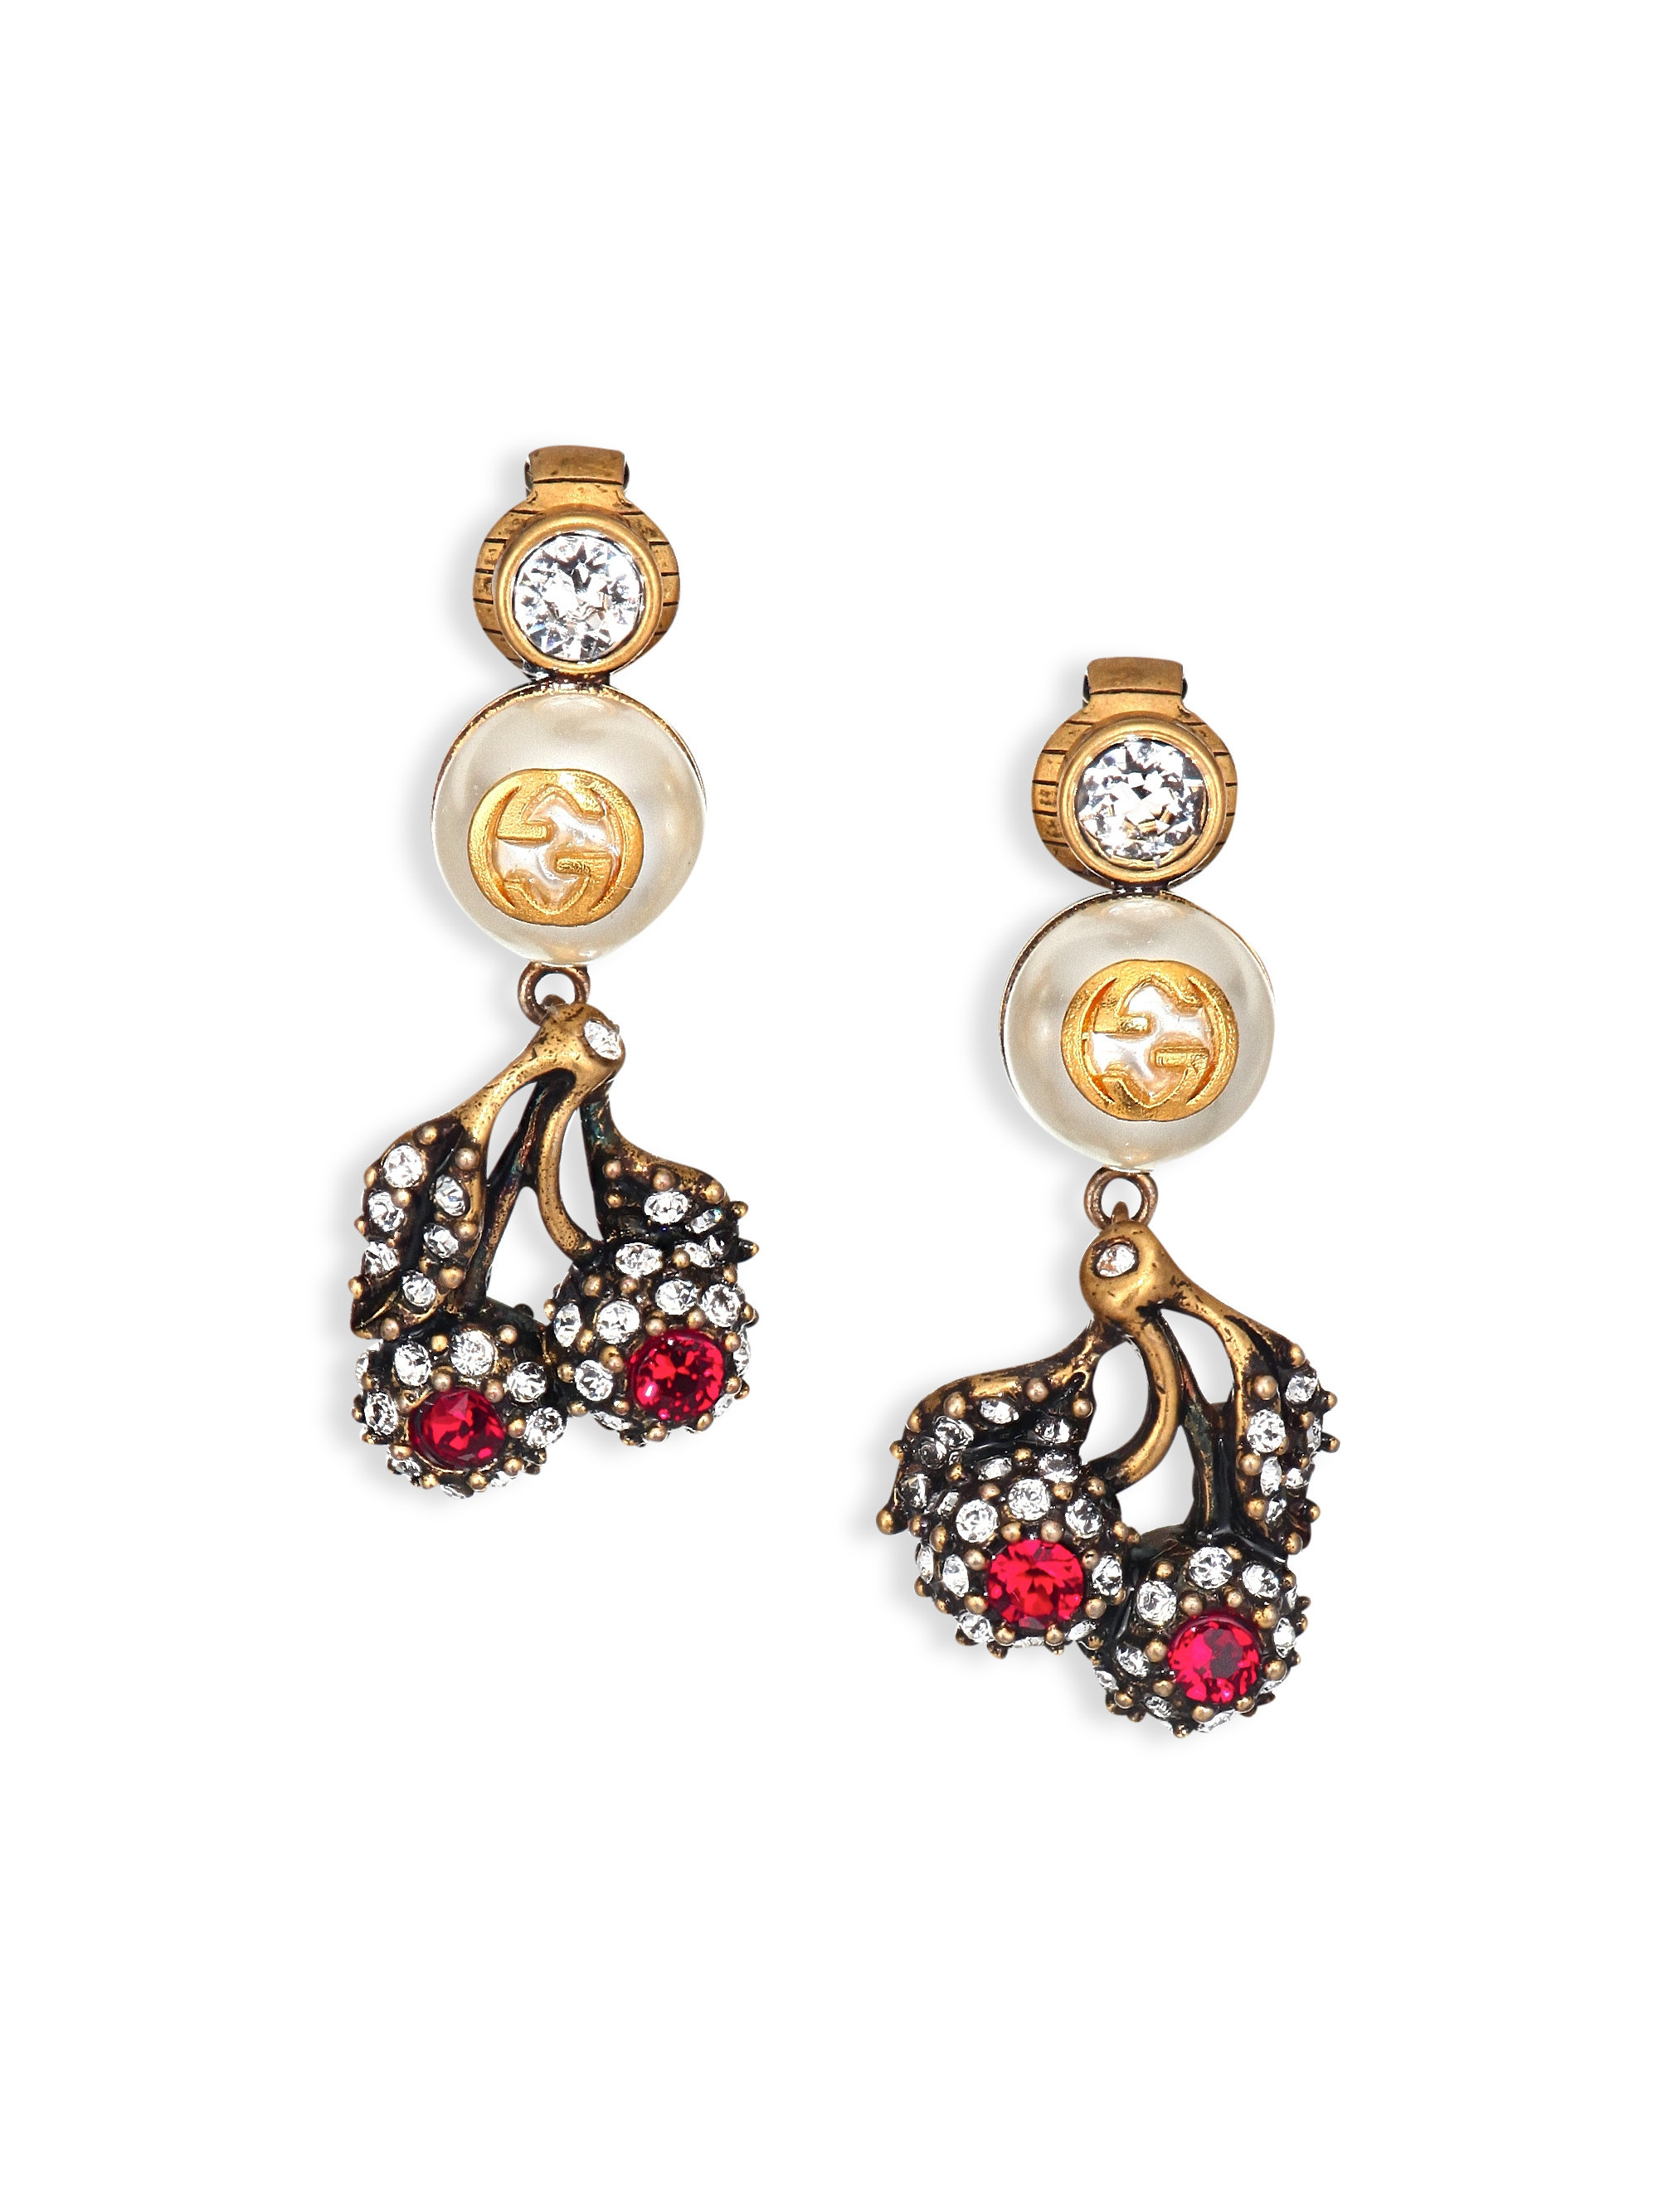 Lyst - Gucci Floral Crystal & Faux Pearl Clip-on Drop Earrings